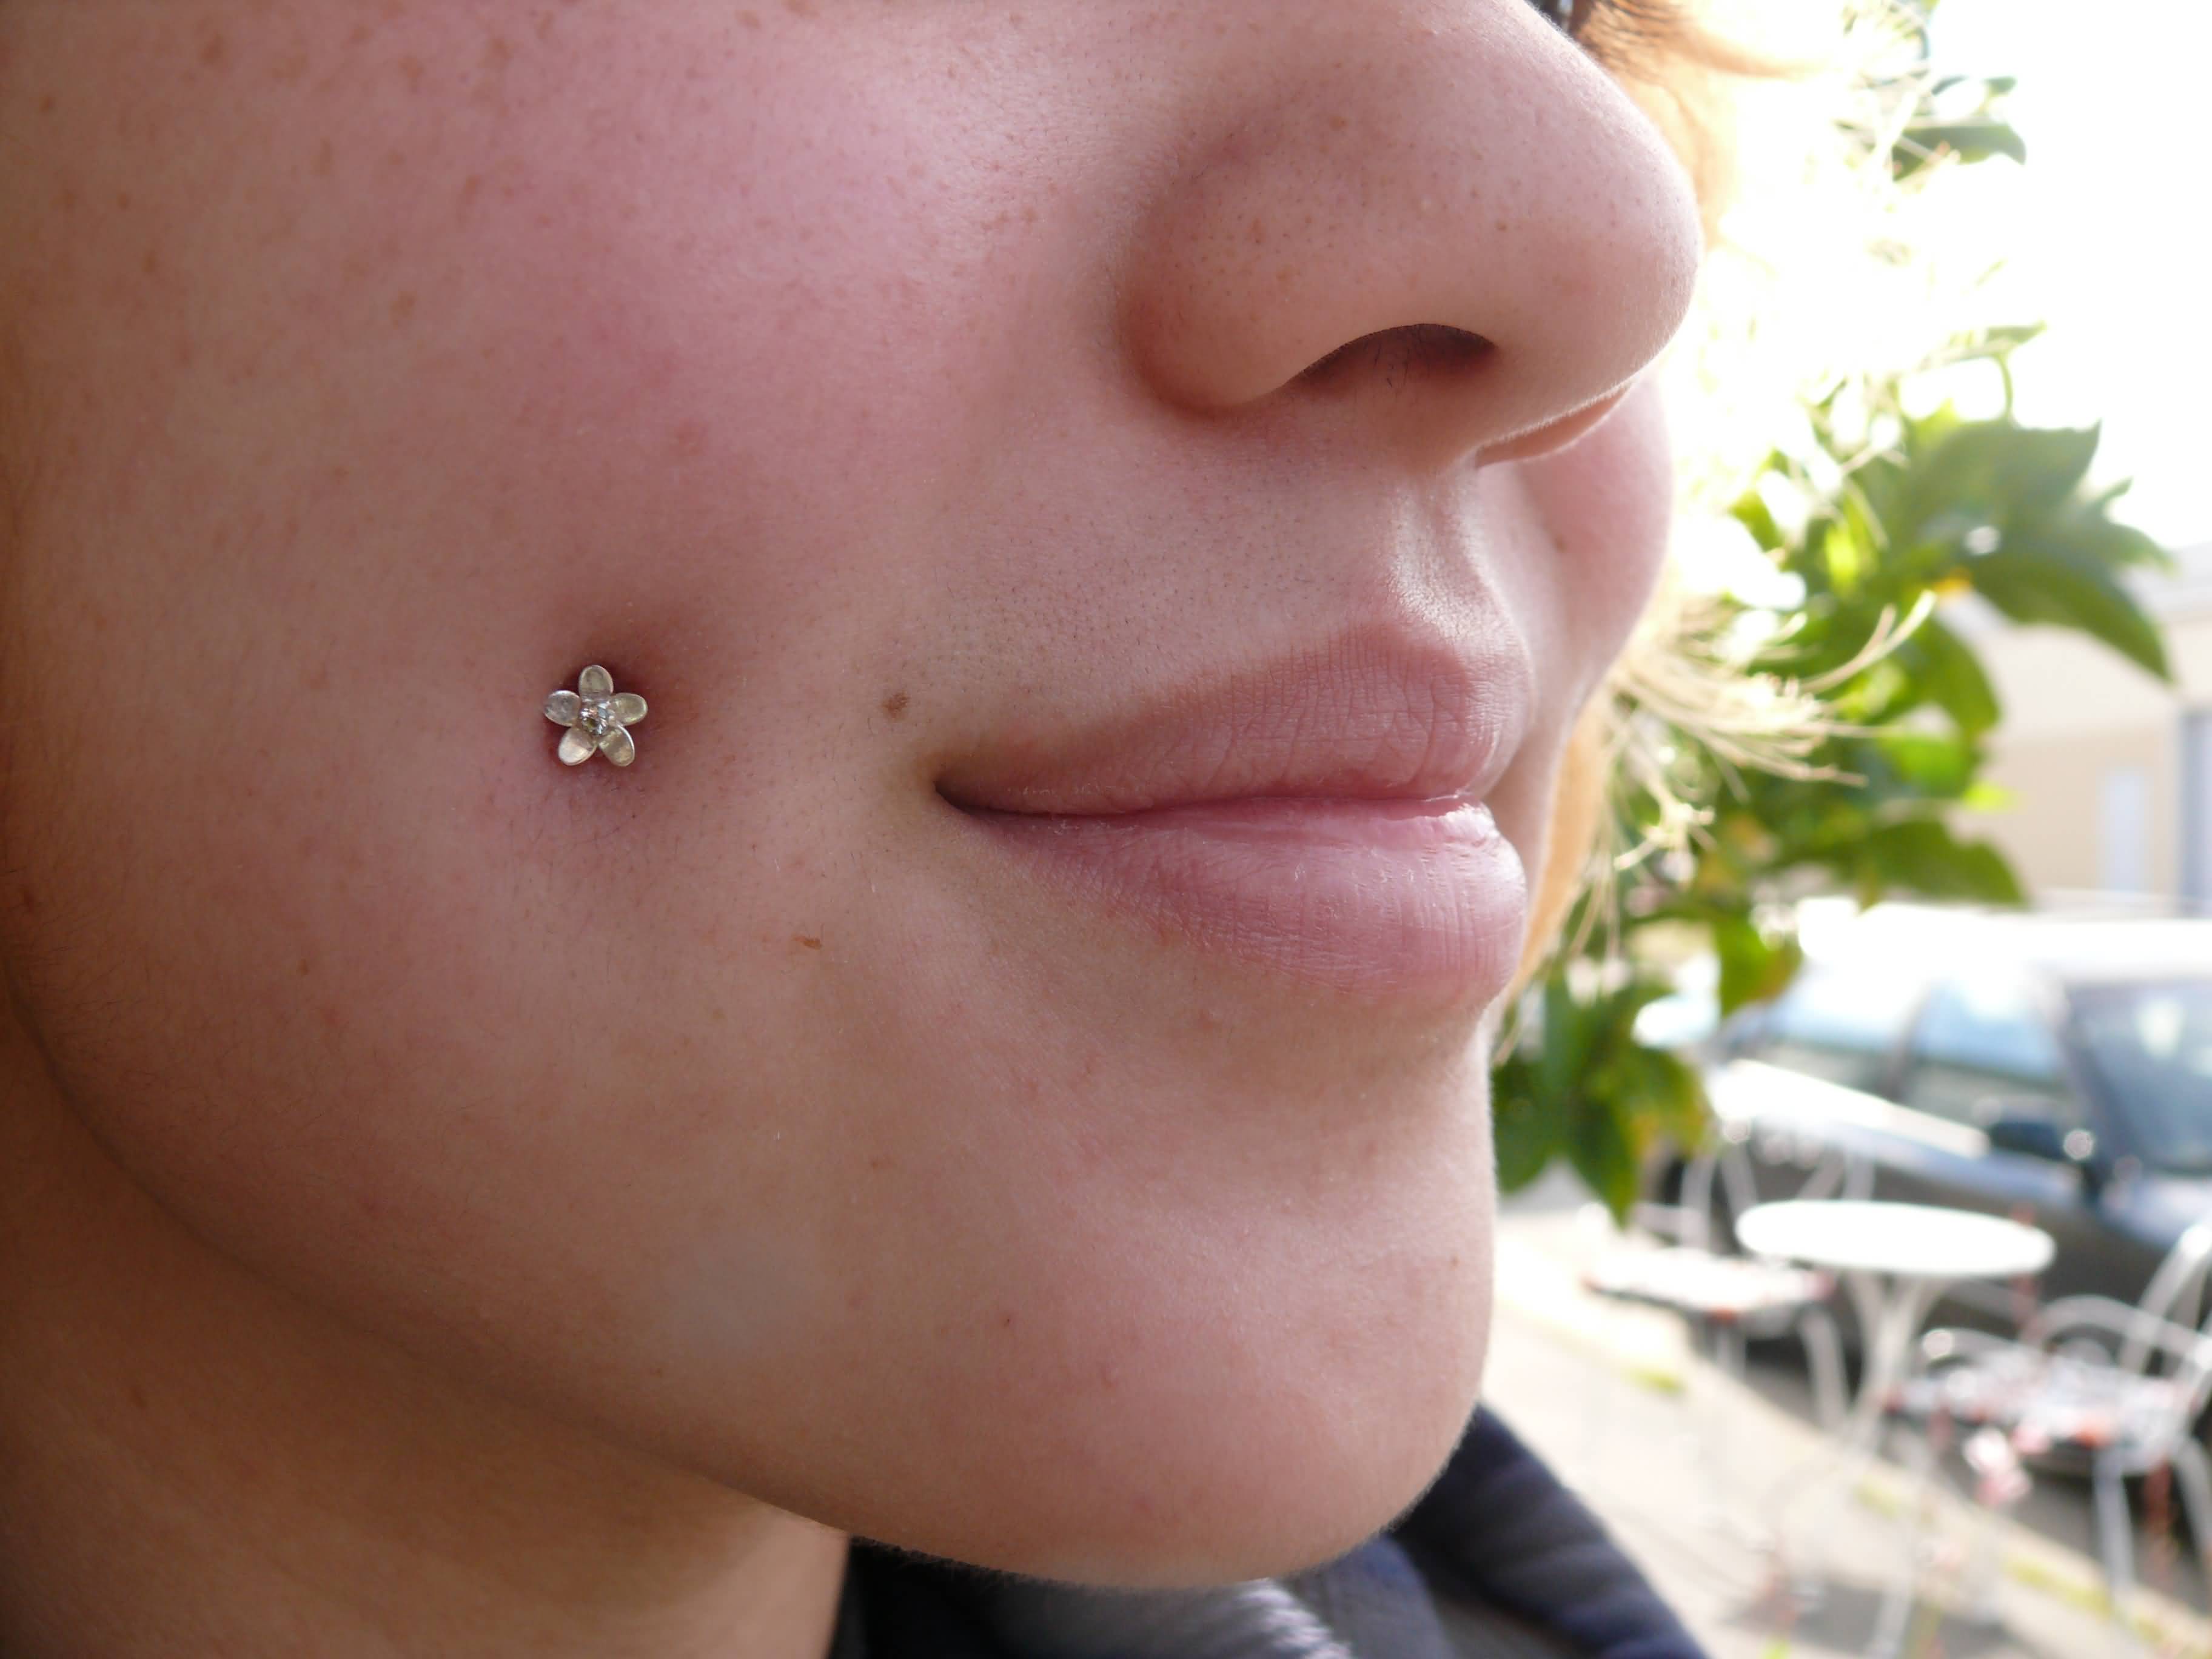 Flower Stud Cheek Piercing For Young Girls